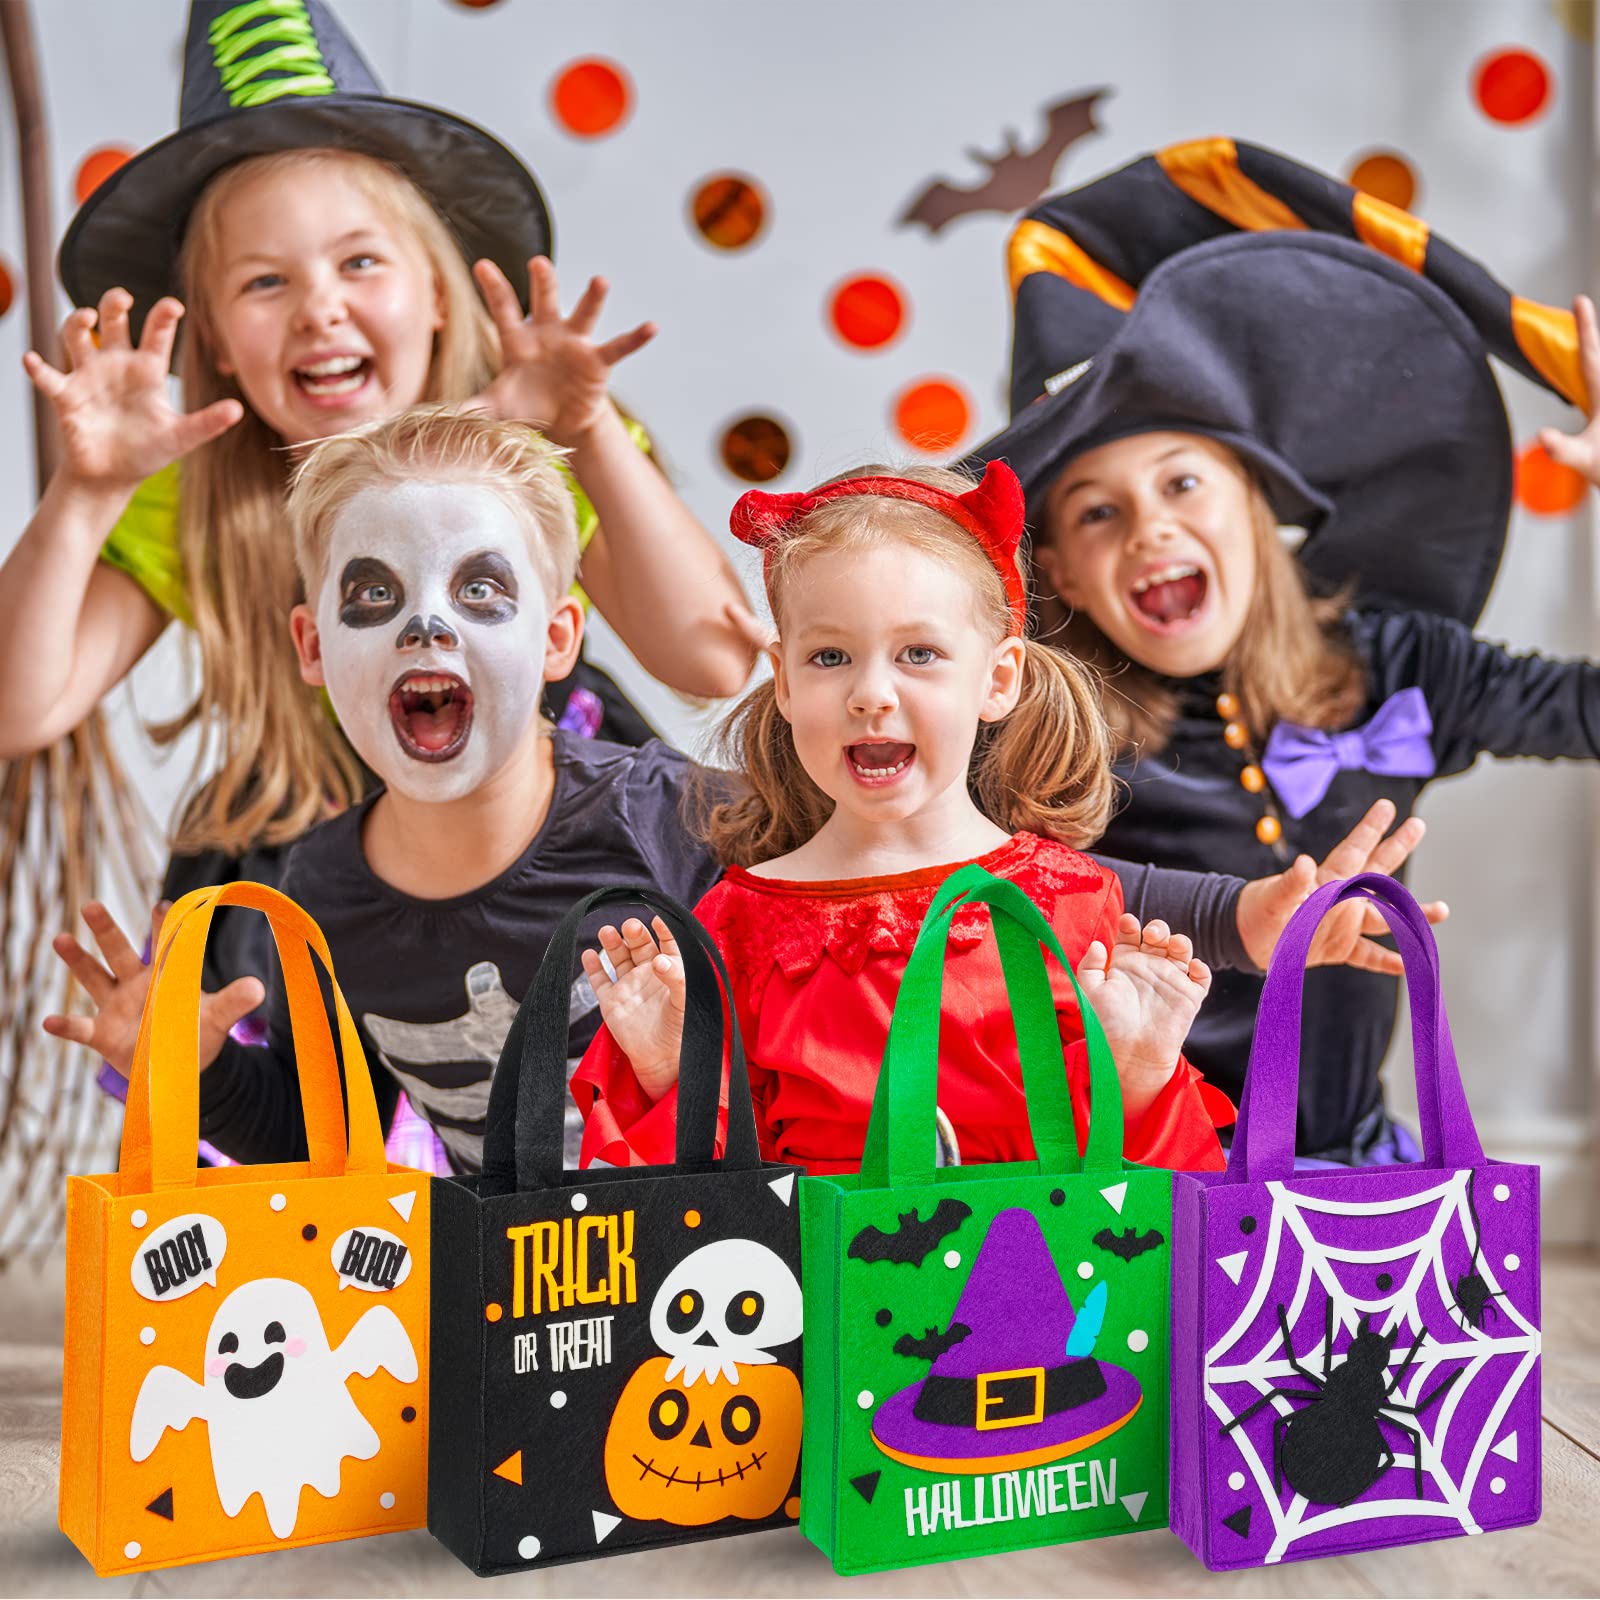 4 Pack Candy Felt Holder Halloween Bags Trick or Treat Gift Bags for Kids, Halloween Boo Spooky Baskets, Trick or Treating Bags, Halloween Candy Bags, Halloween Snacks Bucket, Halloween Goodie Bags